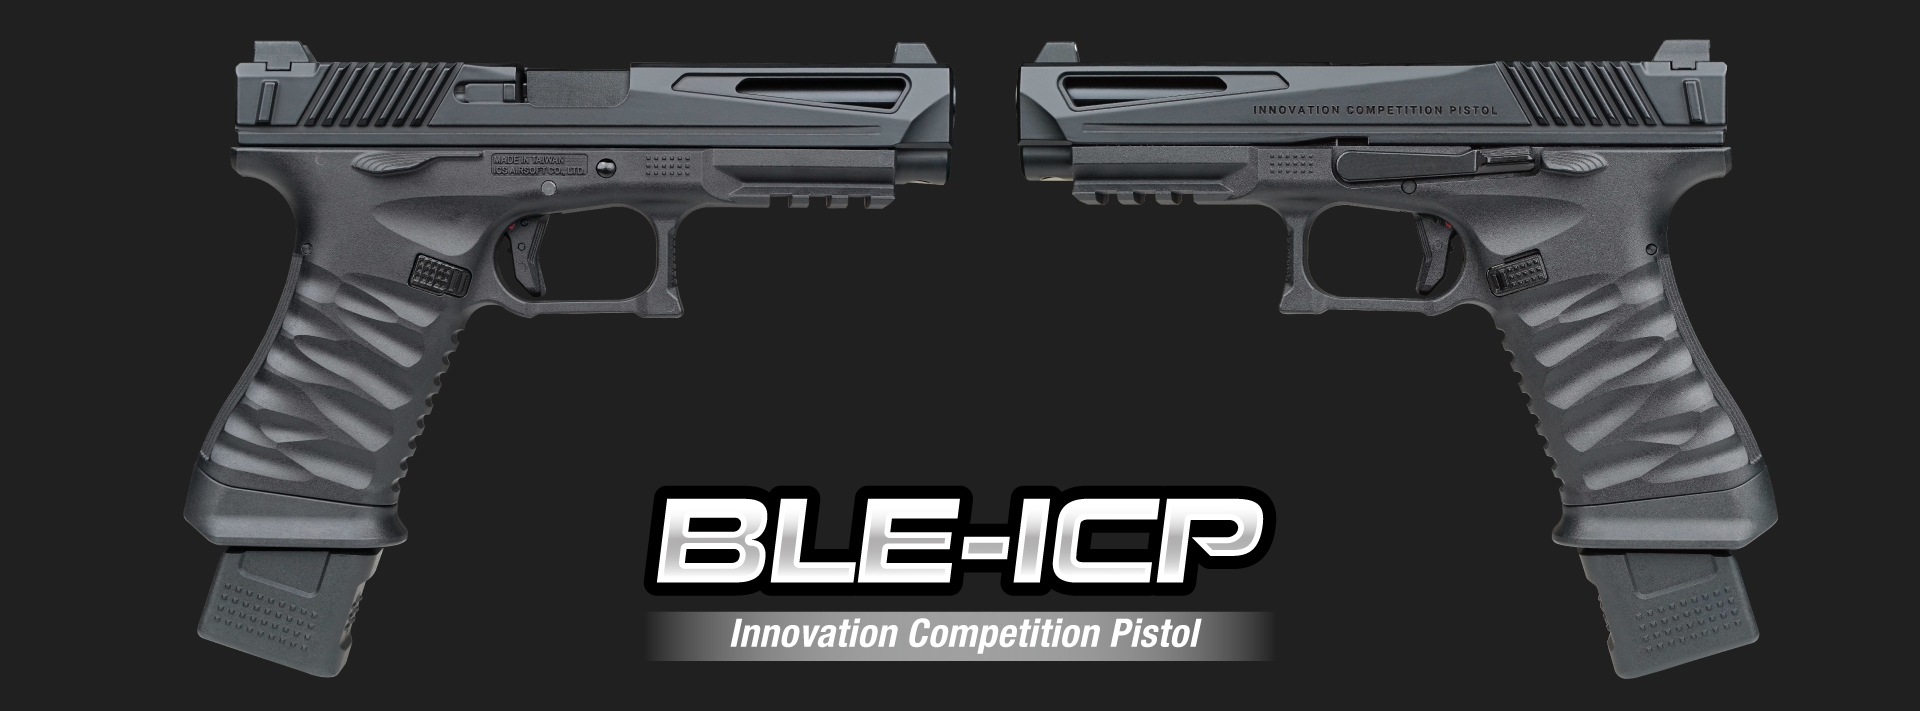 07 April 2023 | The Innovation Competition Pistol BLE-ICP Now Available